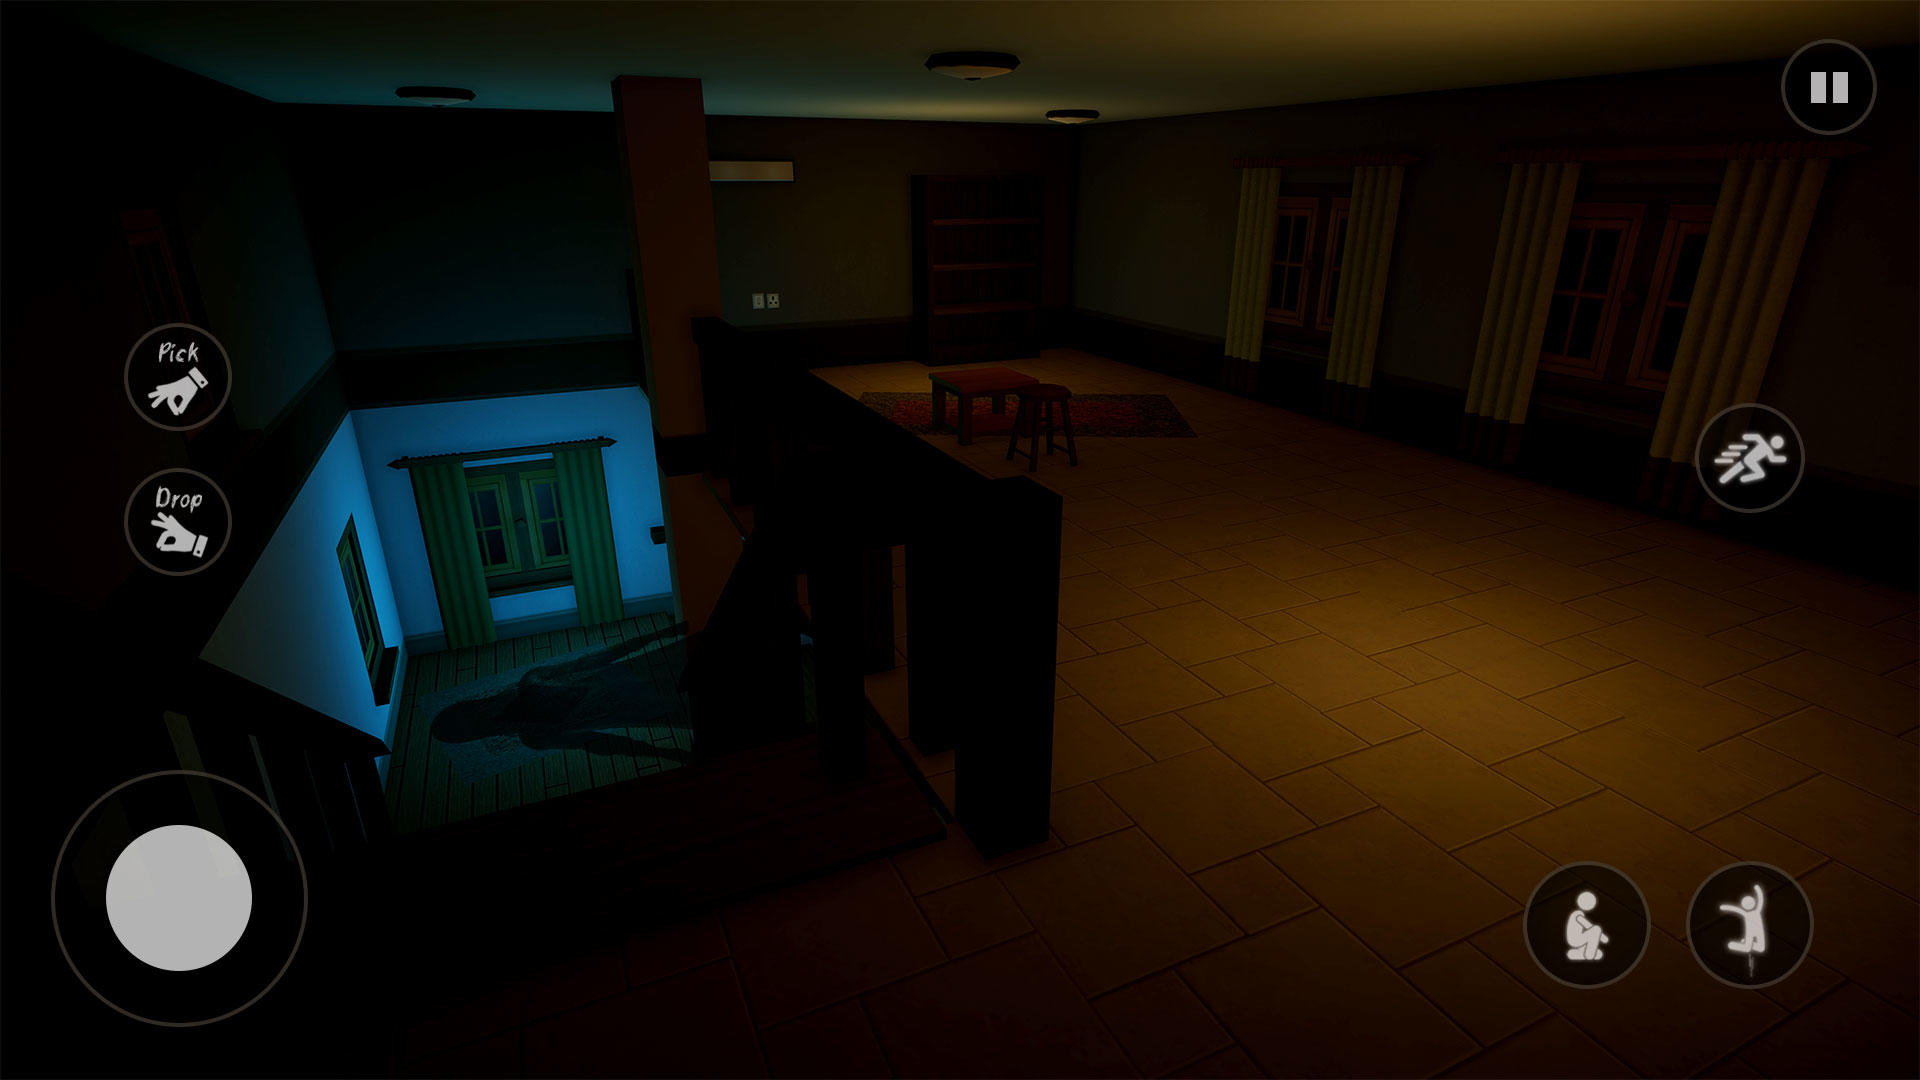 The Backrooms: Survival PC Game - Free Download Full Version